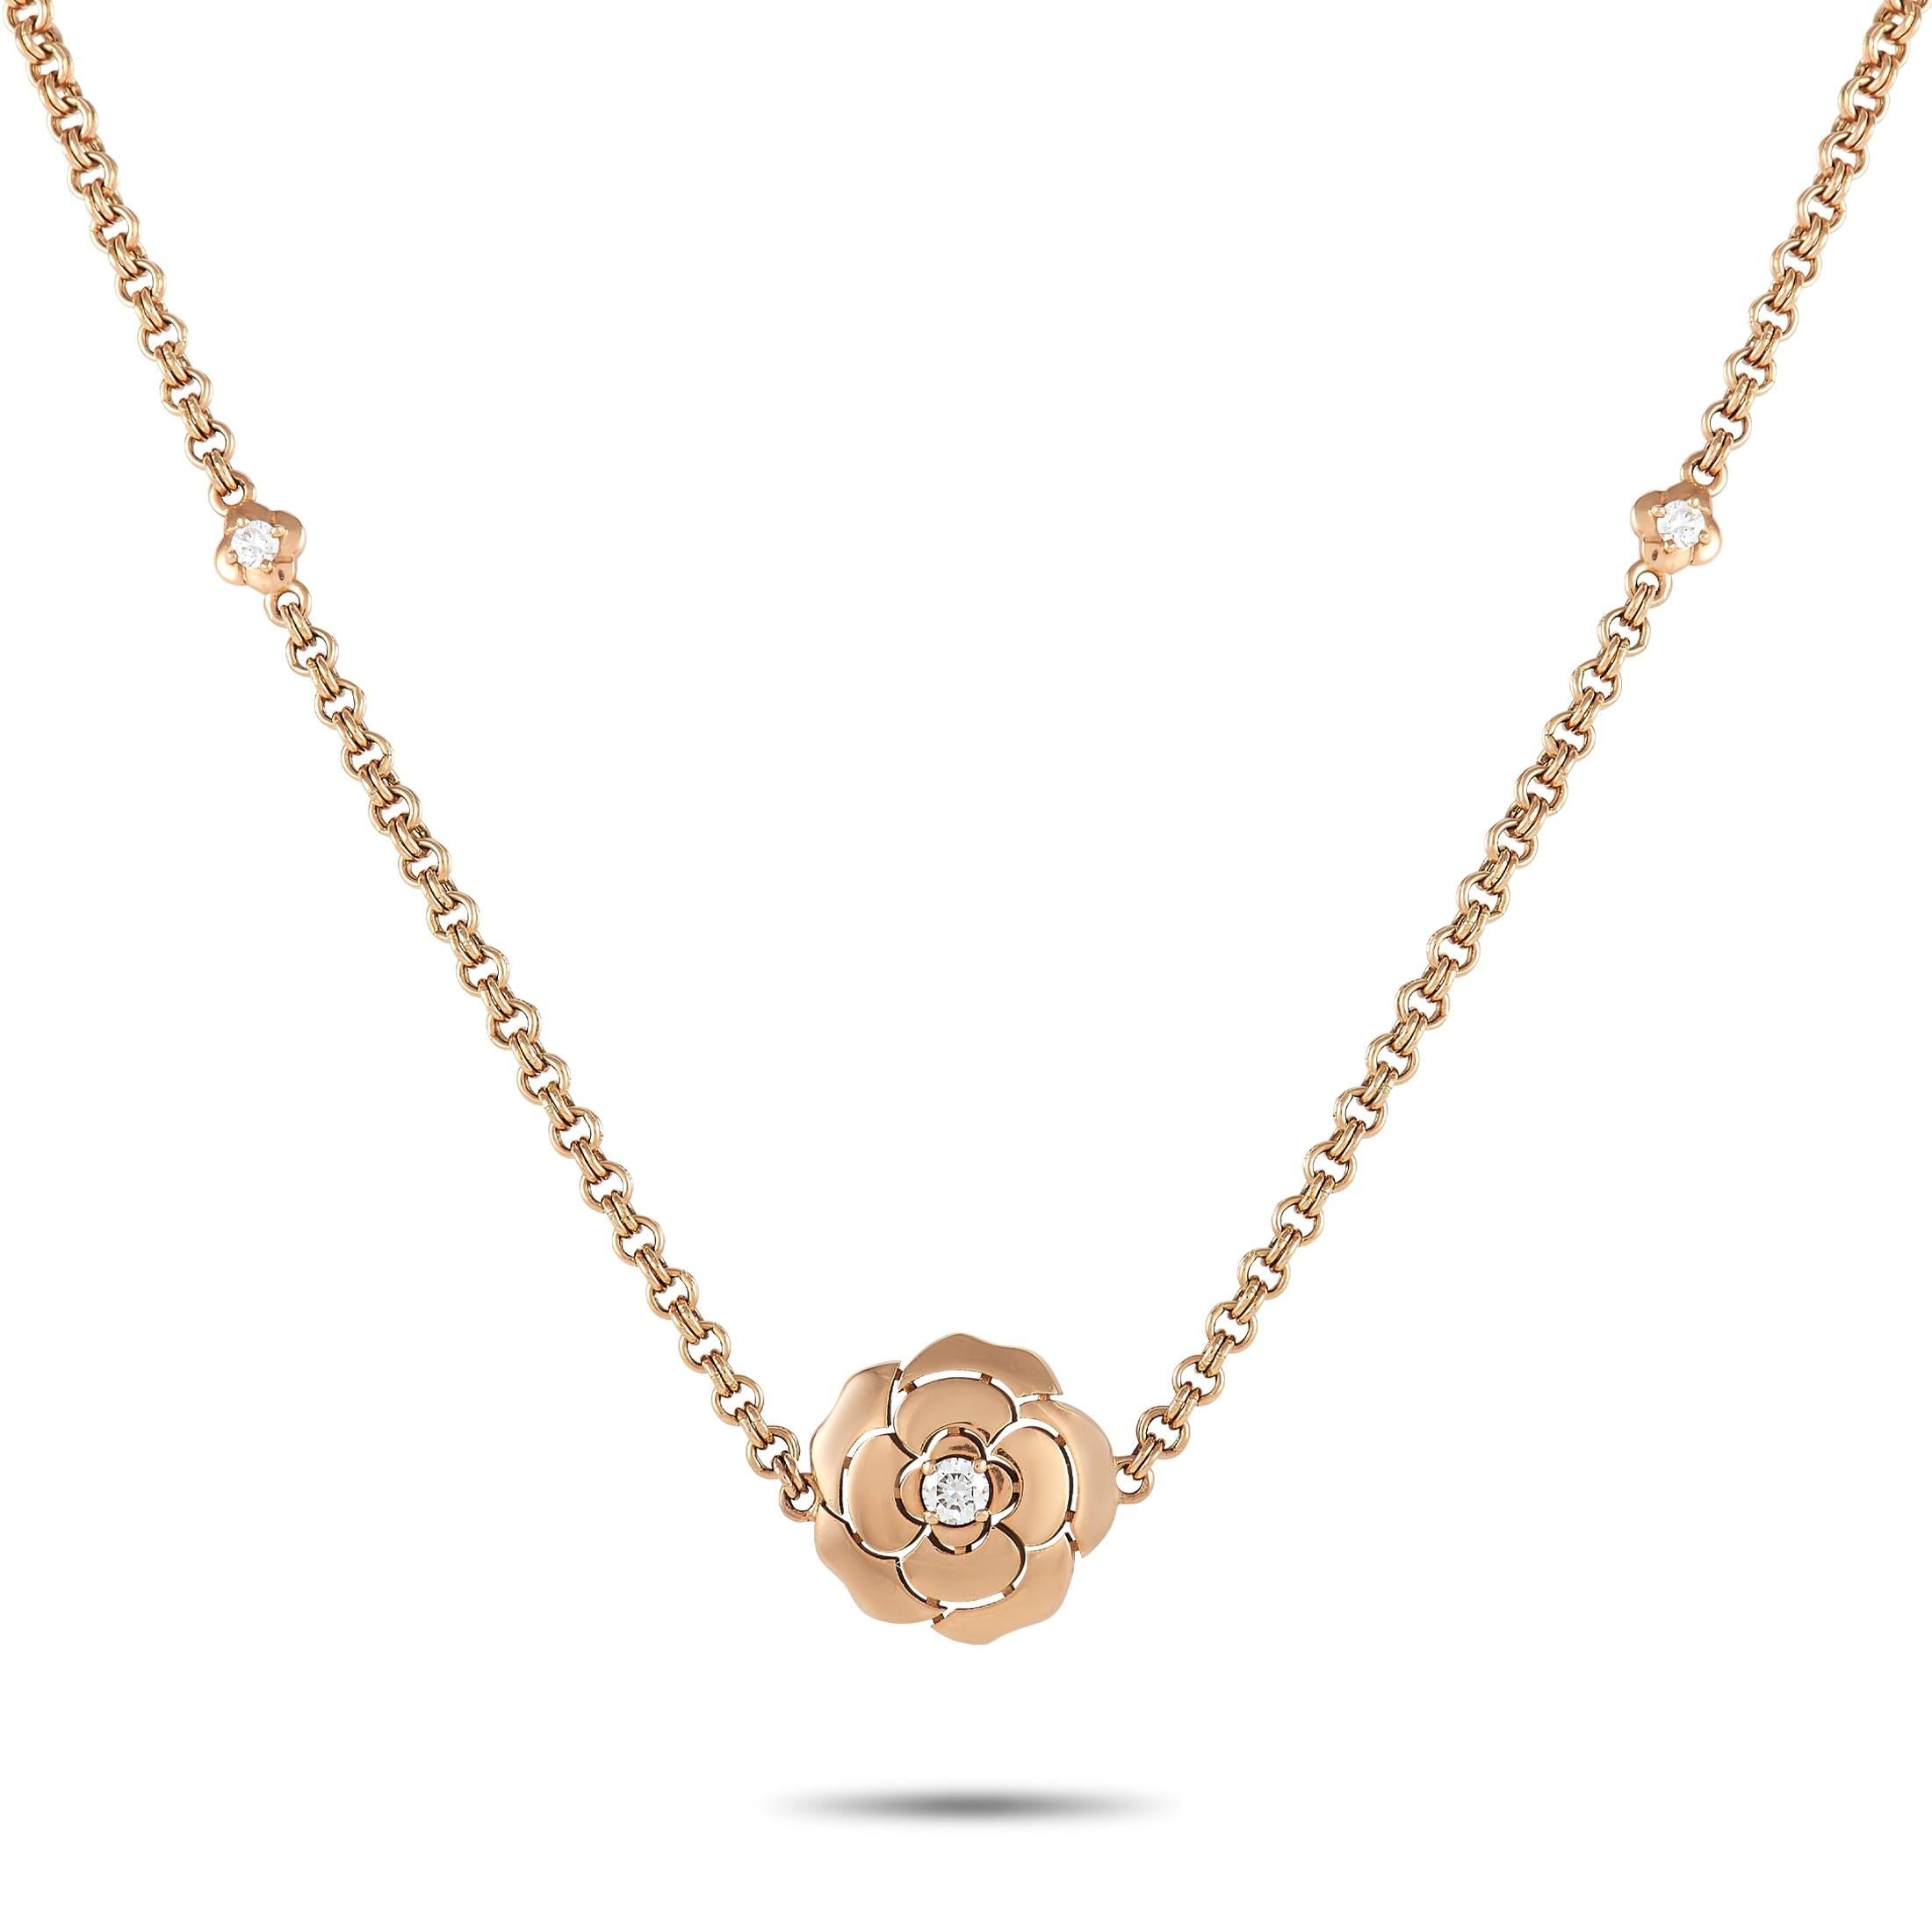 Take the enchanting Chanel camellia wherever you go through this versatile long necklace. Fashioned from yellow and rose gold is this transformable necklace that can be worn in multiple ways: as a Y-shaped necklace, a double row necklace, a long